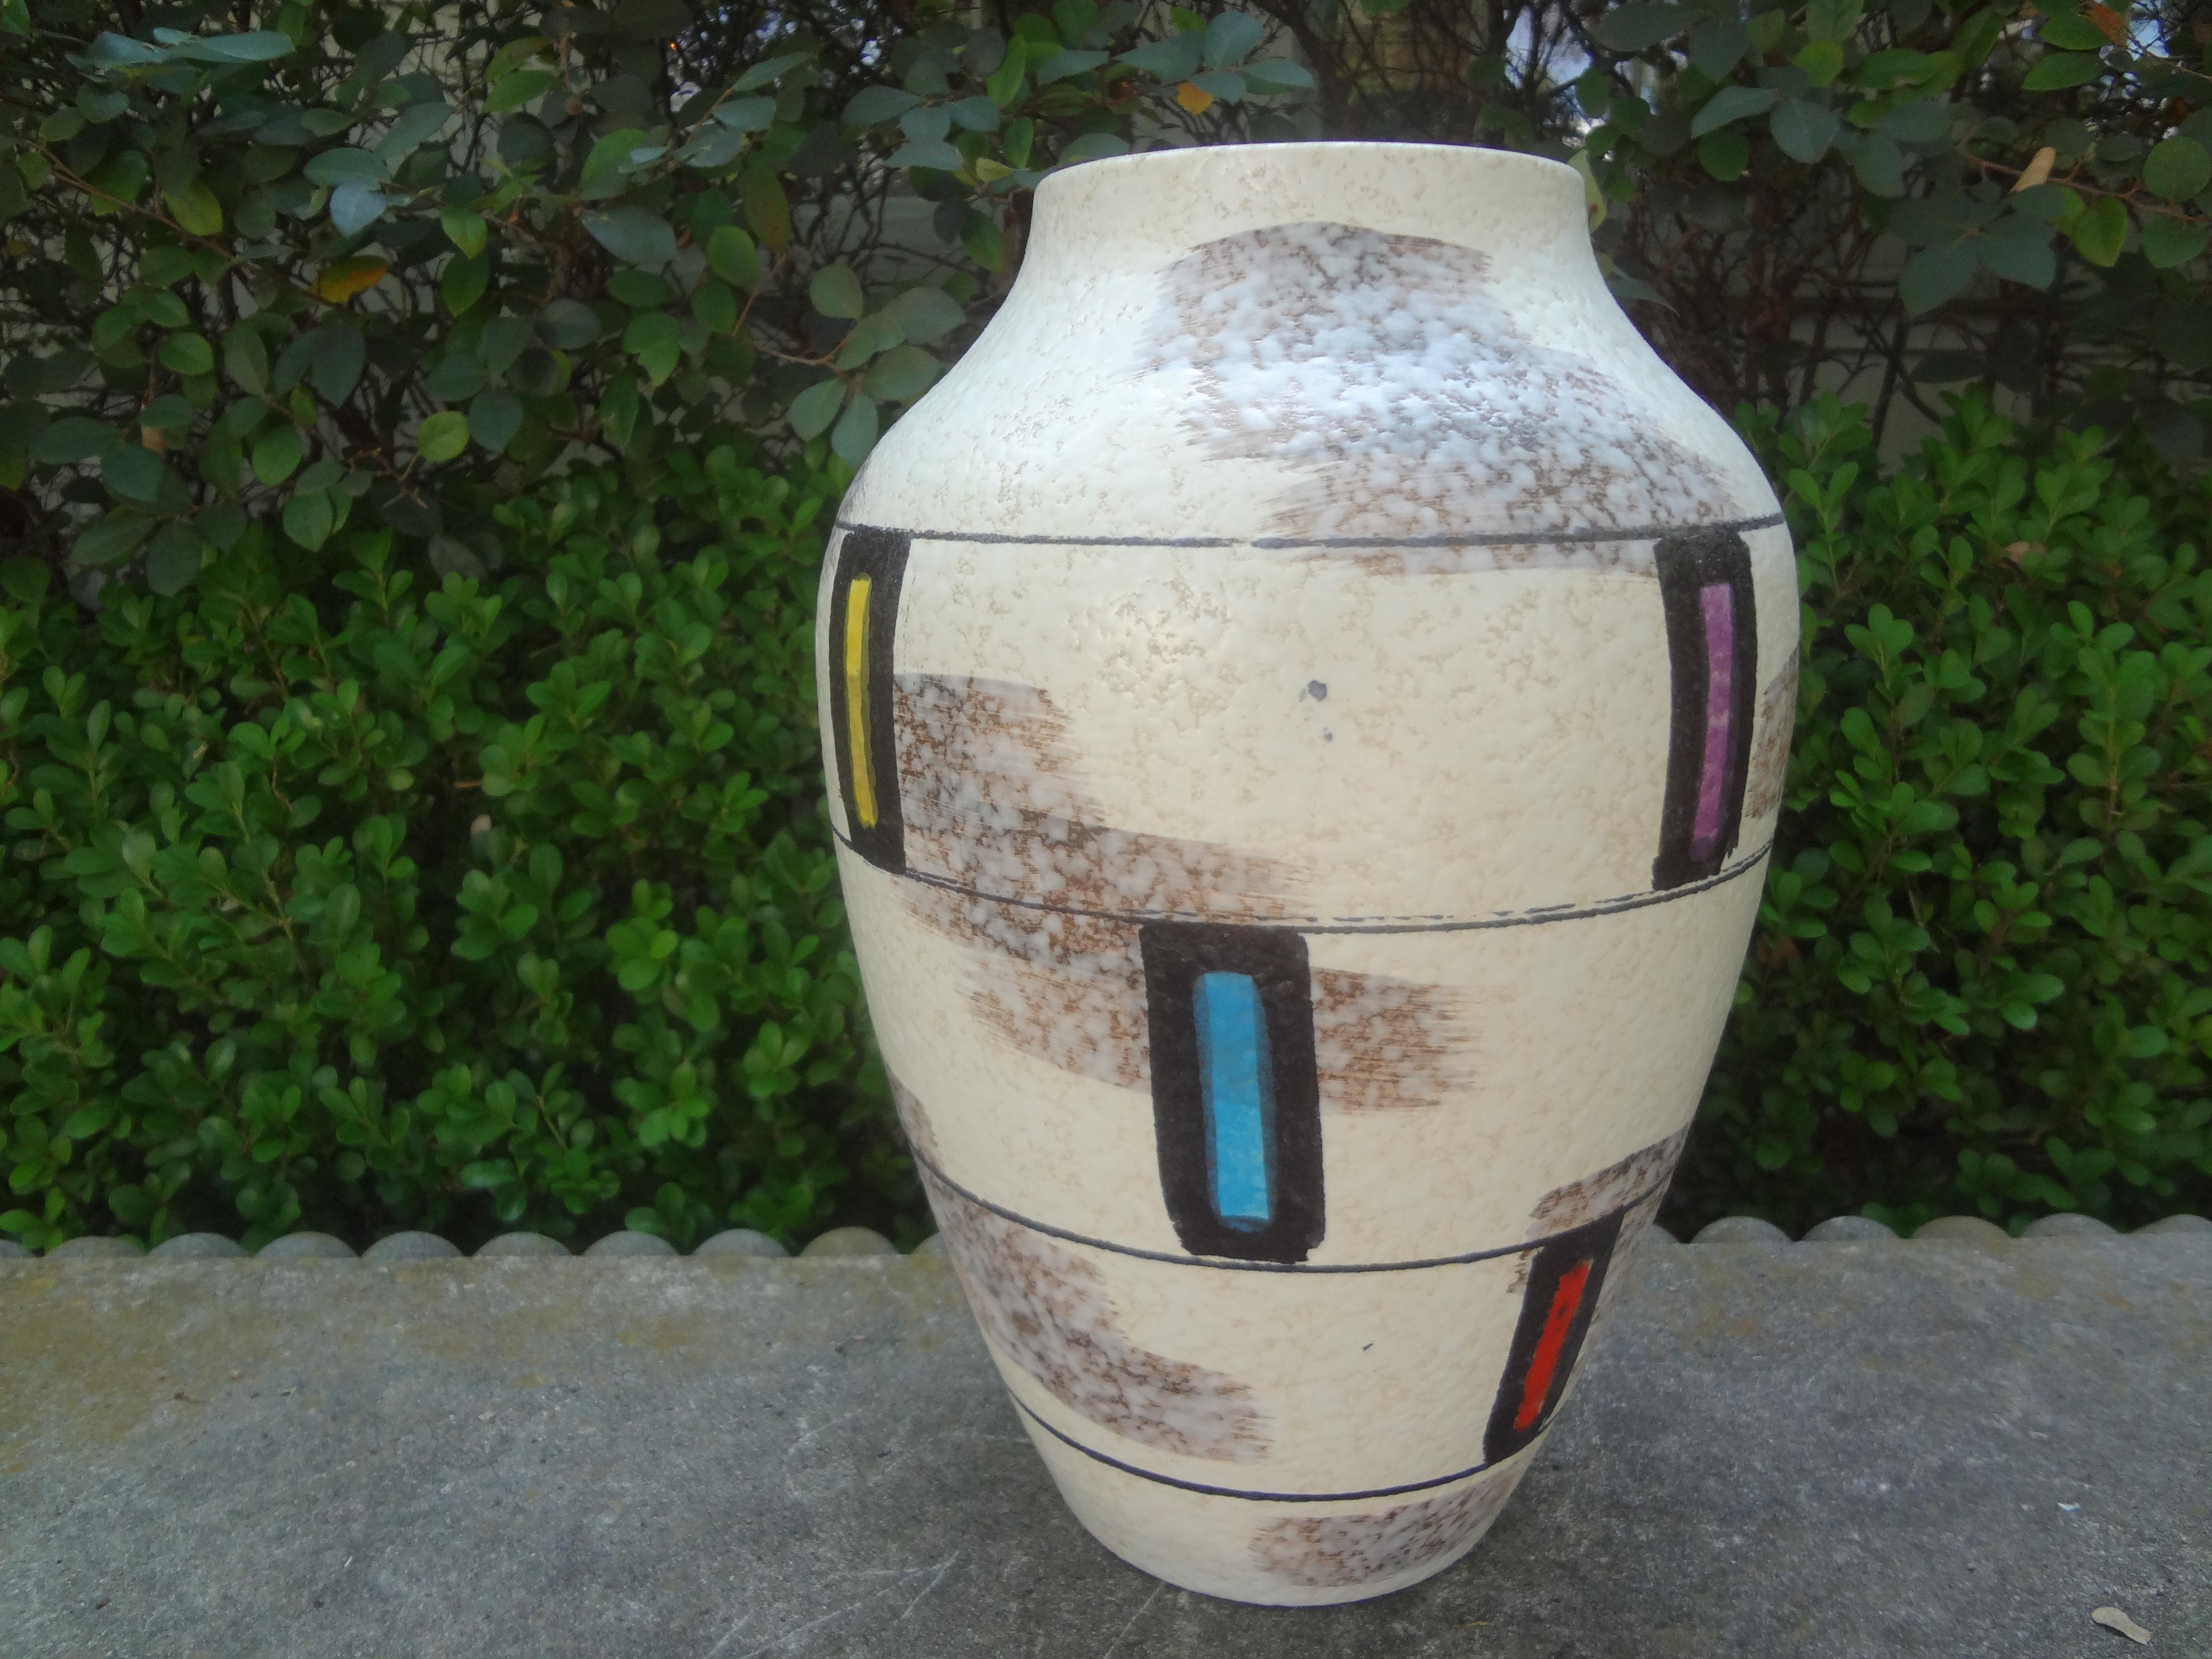 Mid-century Abstract Glazed Pottery Vase From West Germany.
This lovely vase is executed in an interesting geometric abstract design in purple, yellow, red and turquoise on a cream colored background.
Just one in our large collection offered on